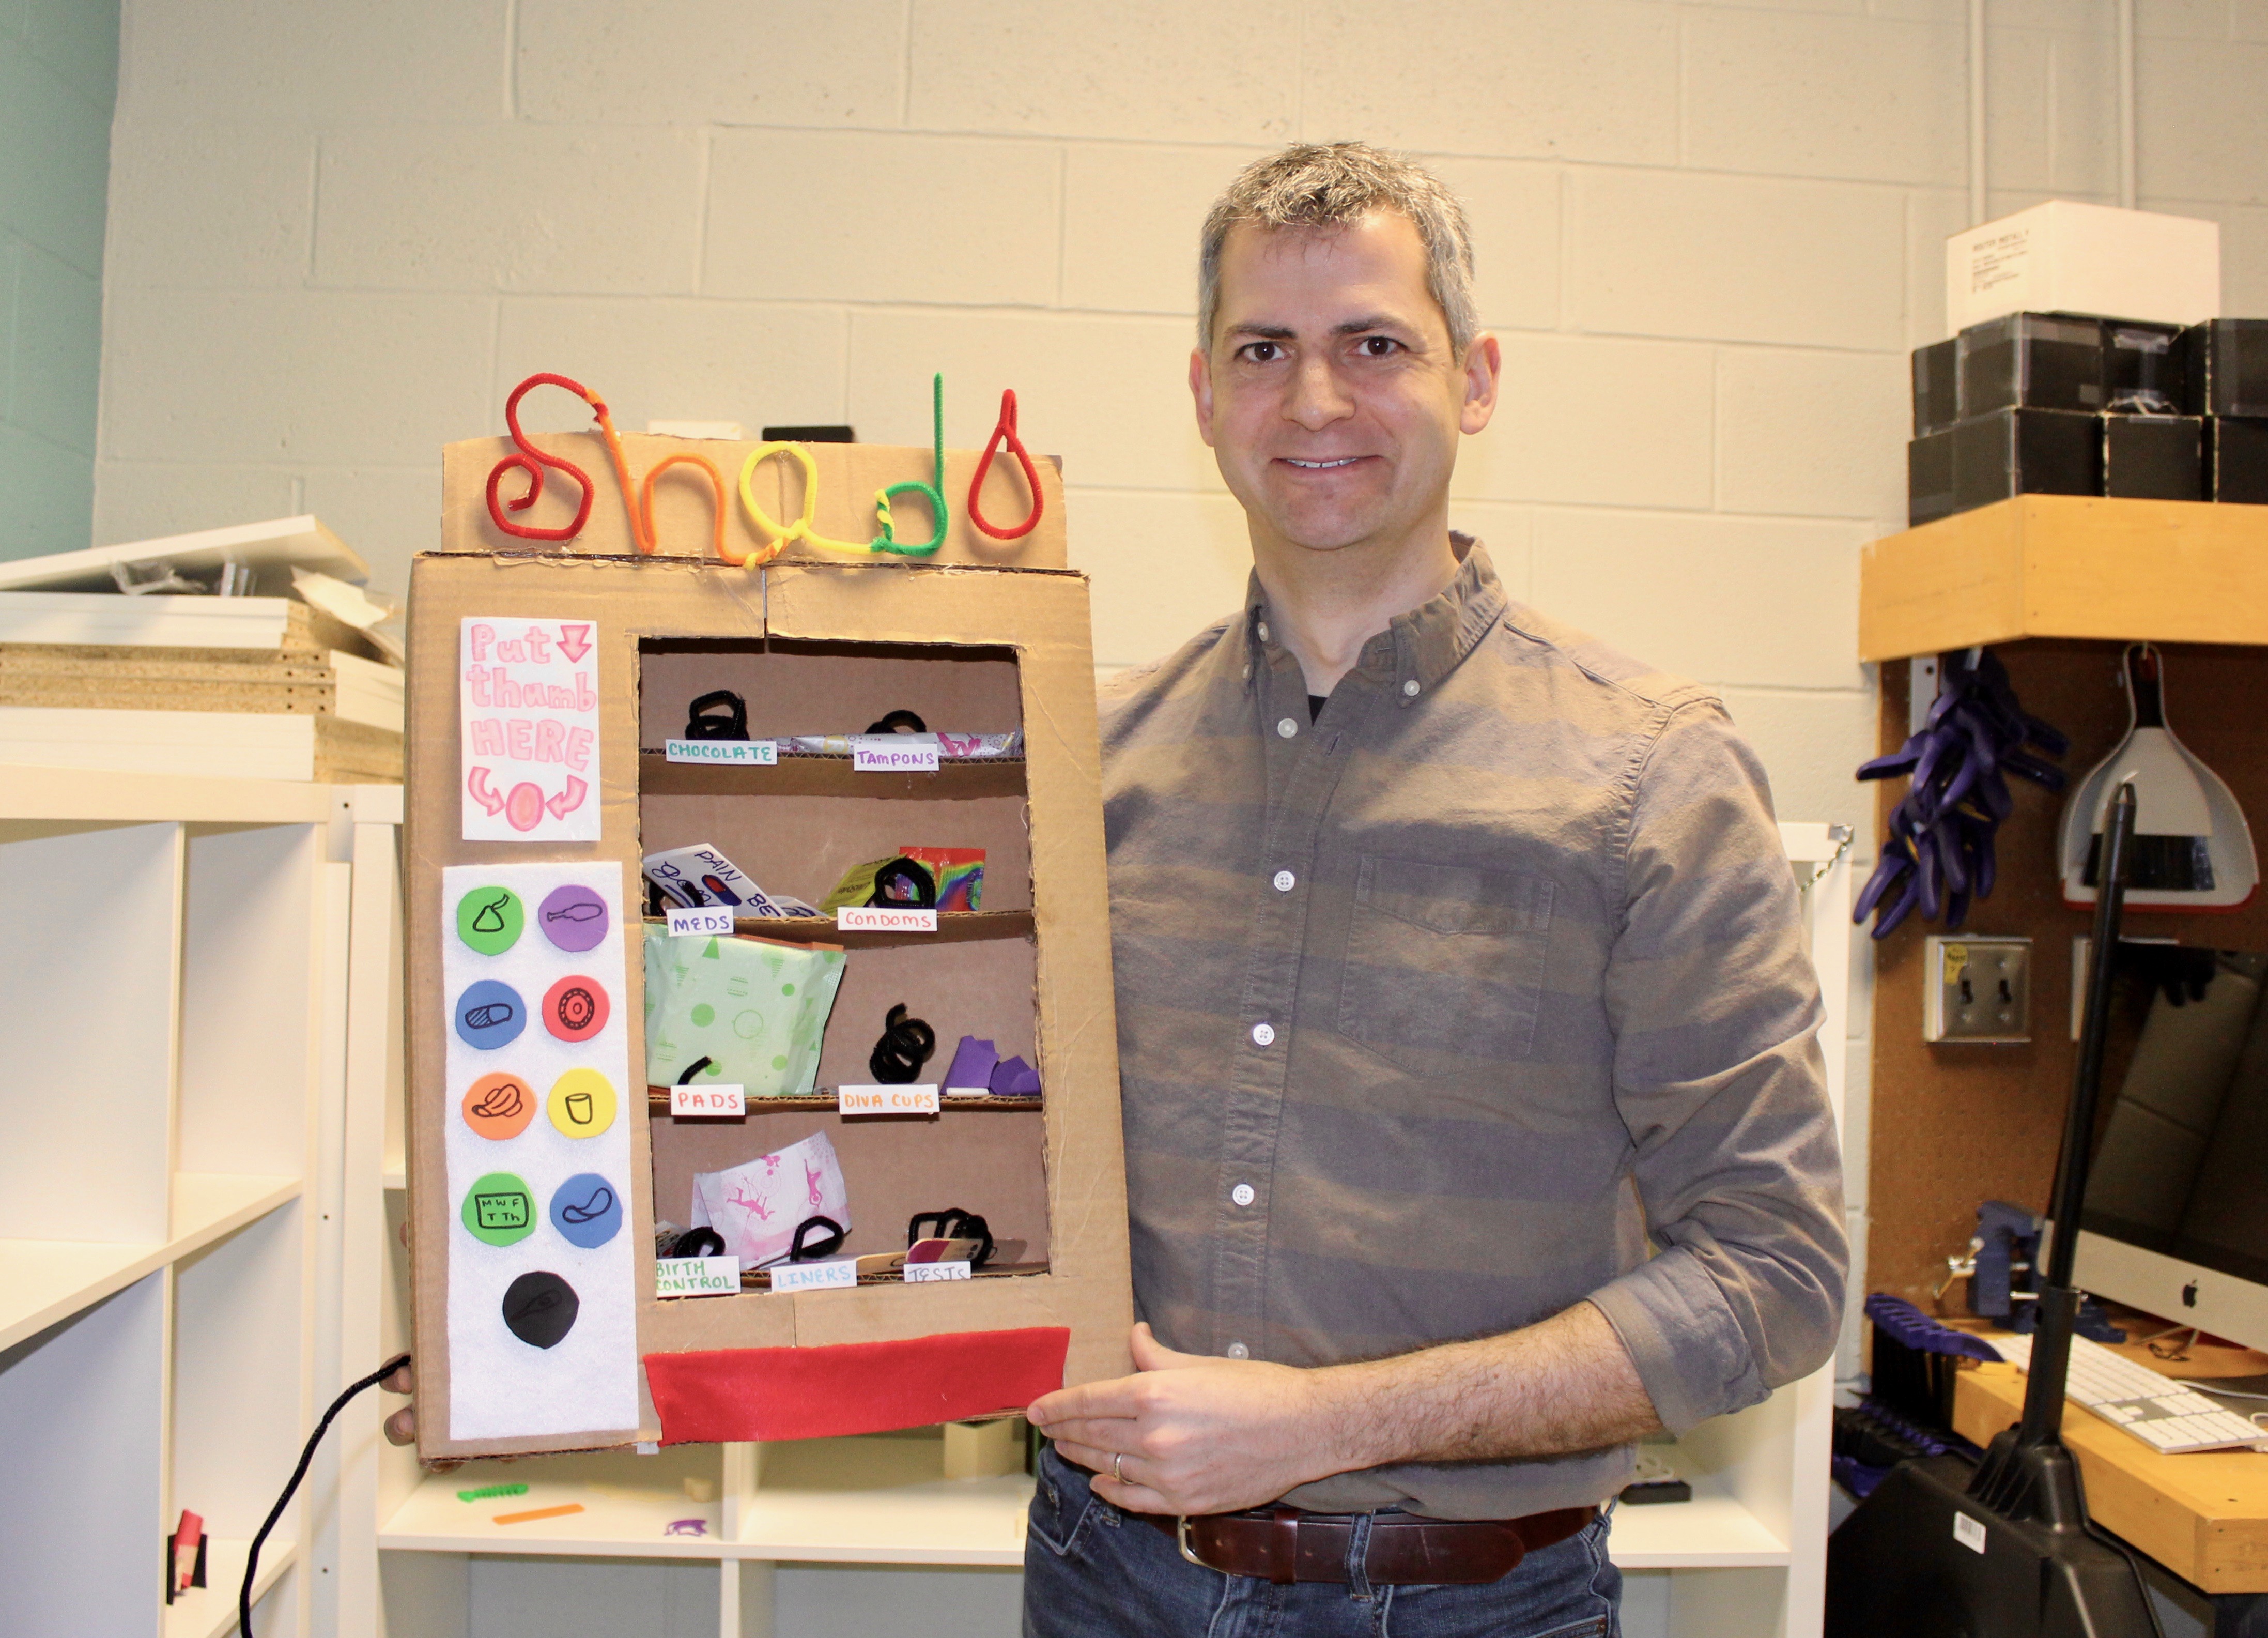 Isaac posing with a student project, the shed vending machine for women's reproductive health. Photo credit: Piper Cook, LBC